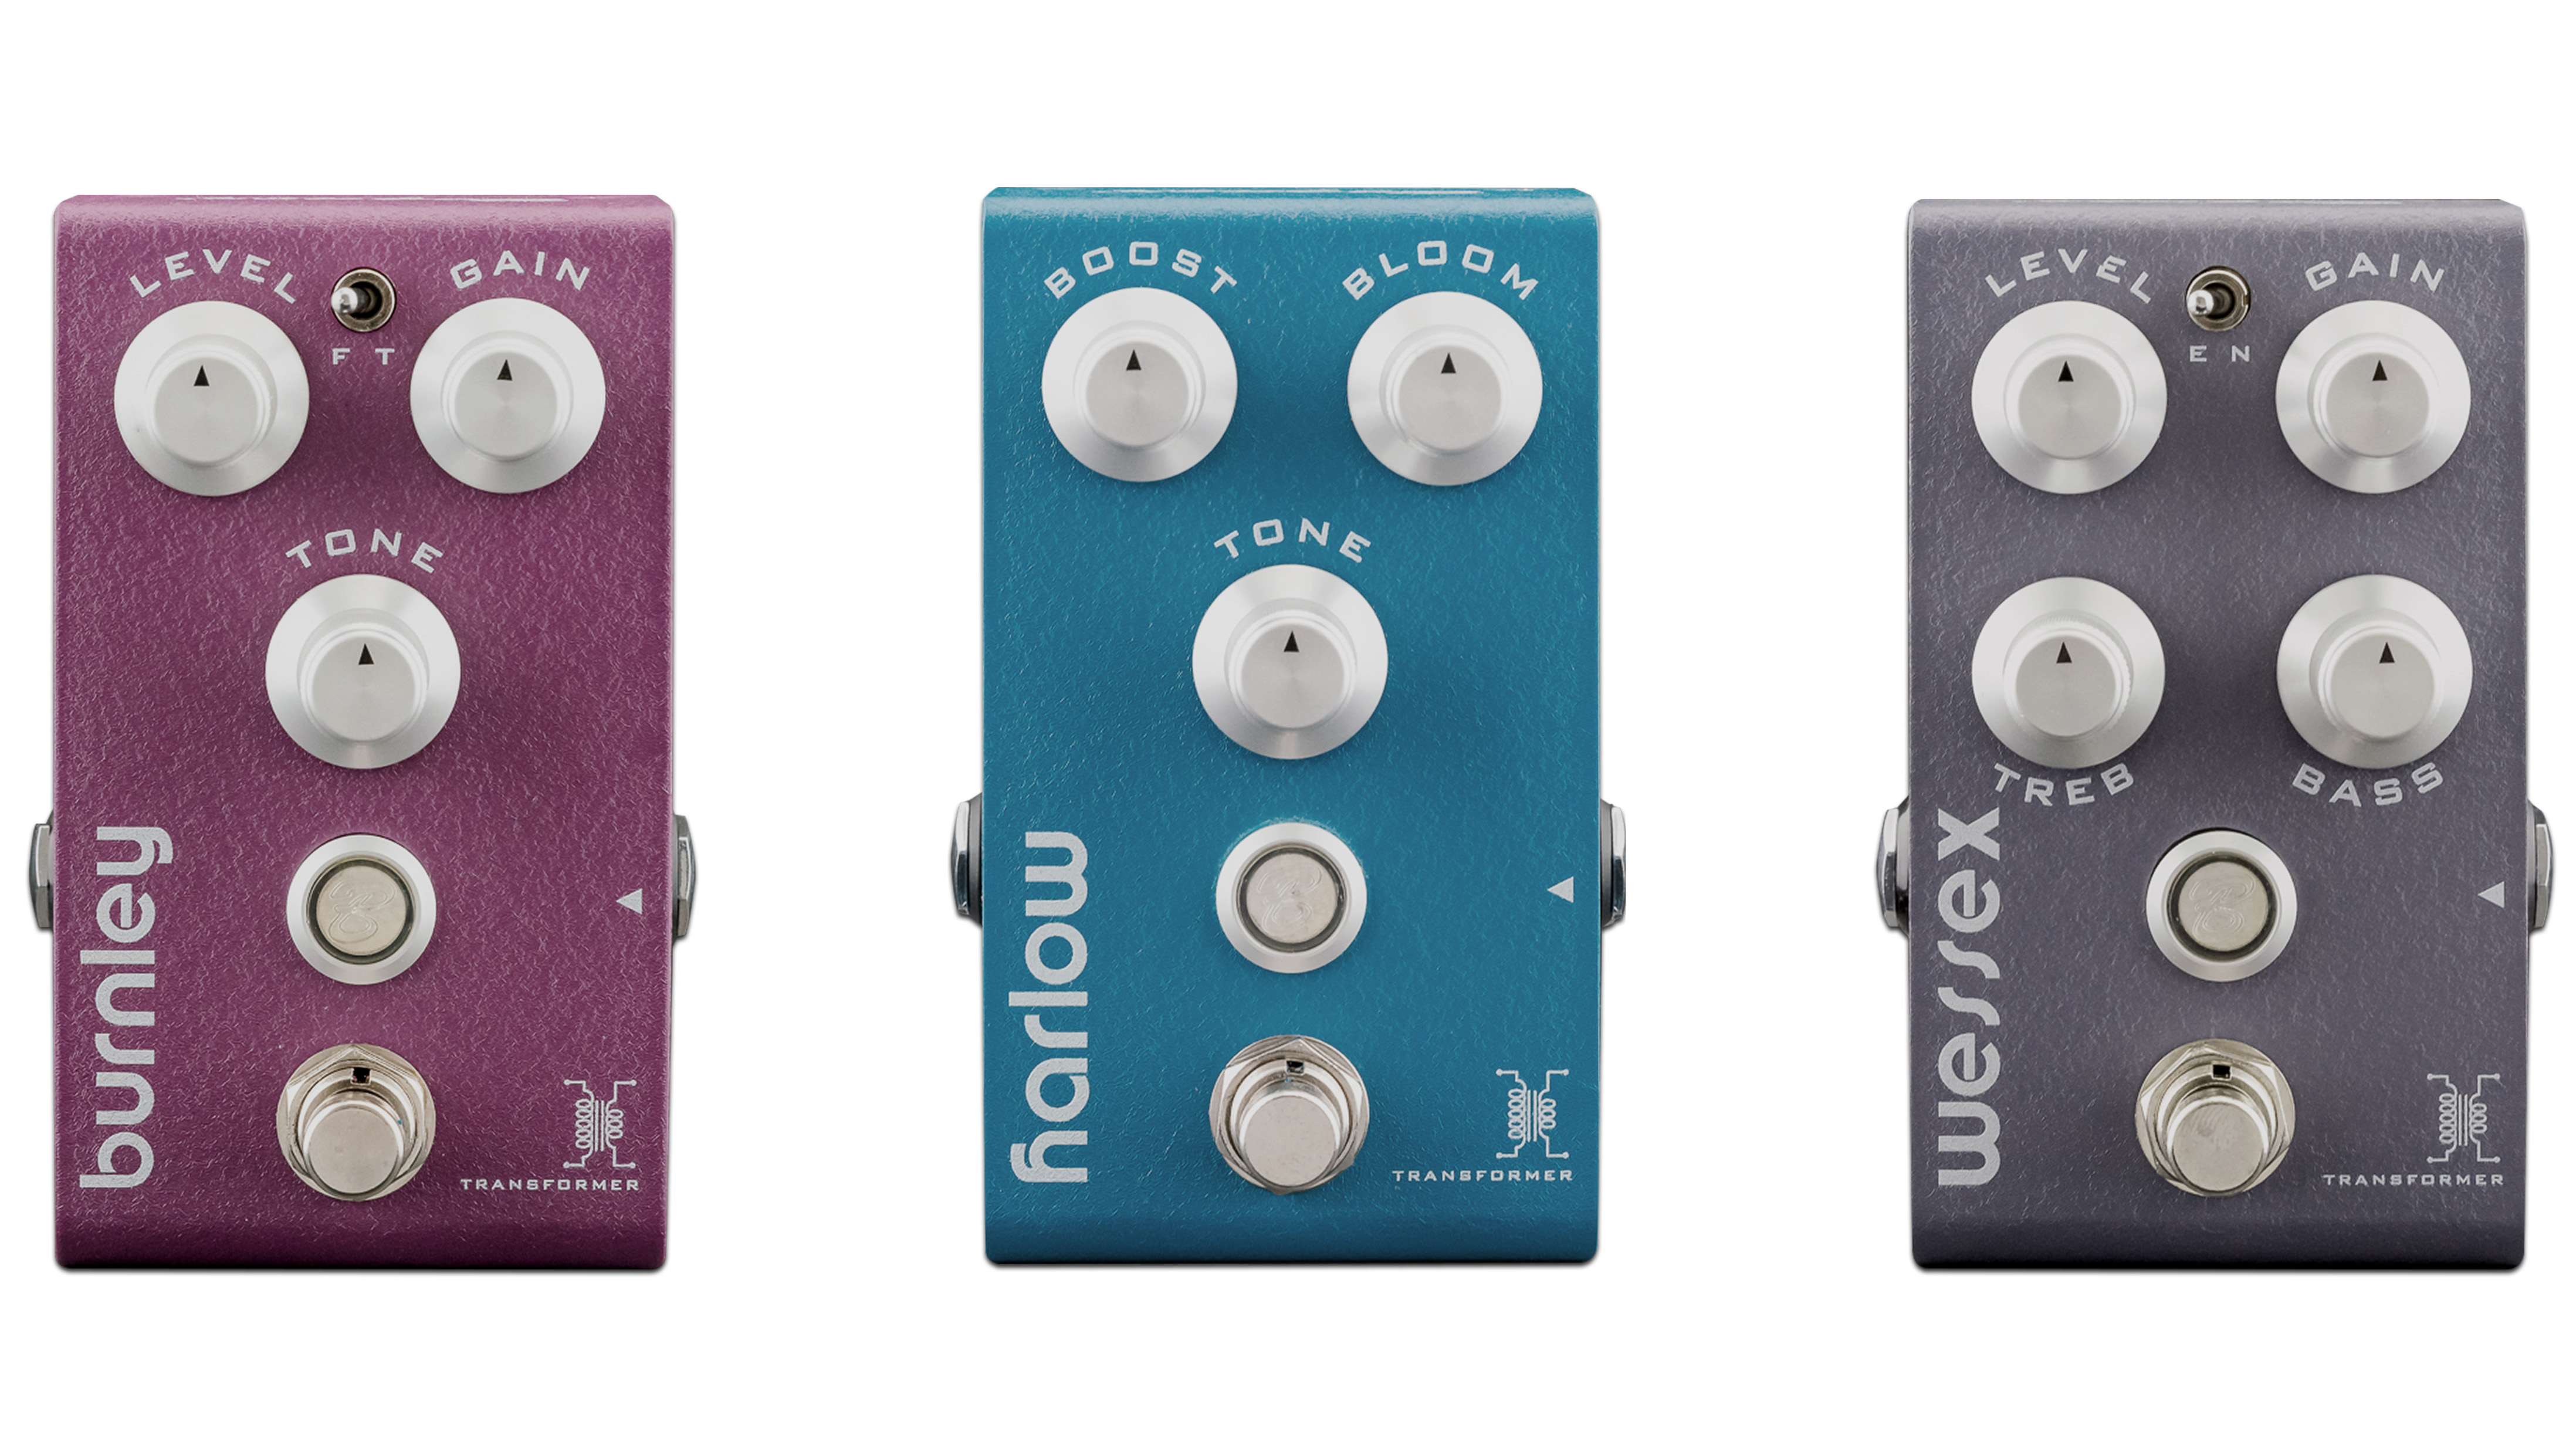 Bogner is reissuing its acclaimed overdrive, distortion and boost